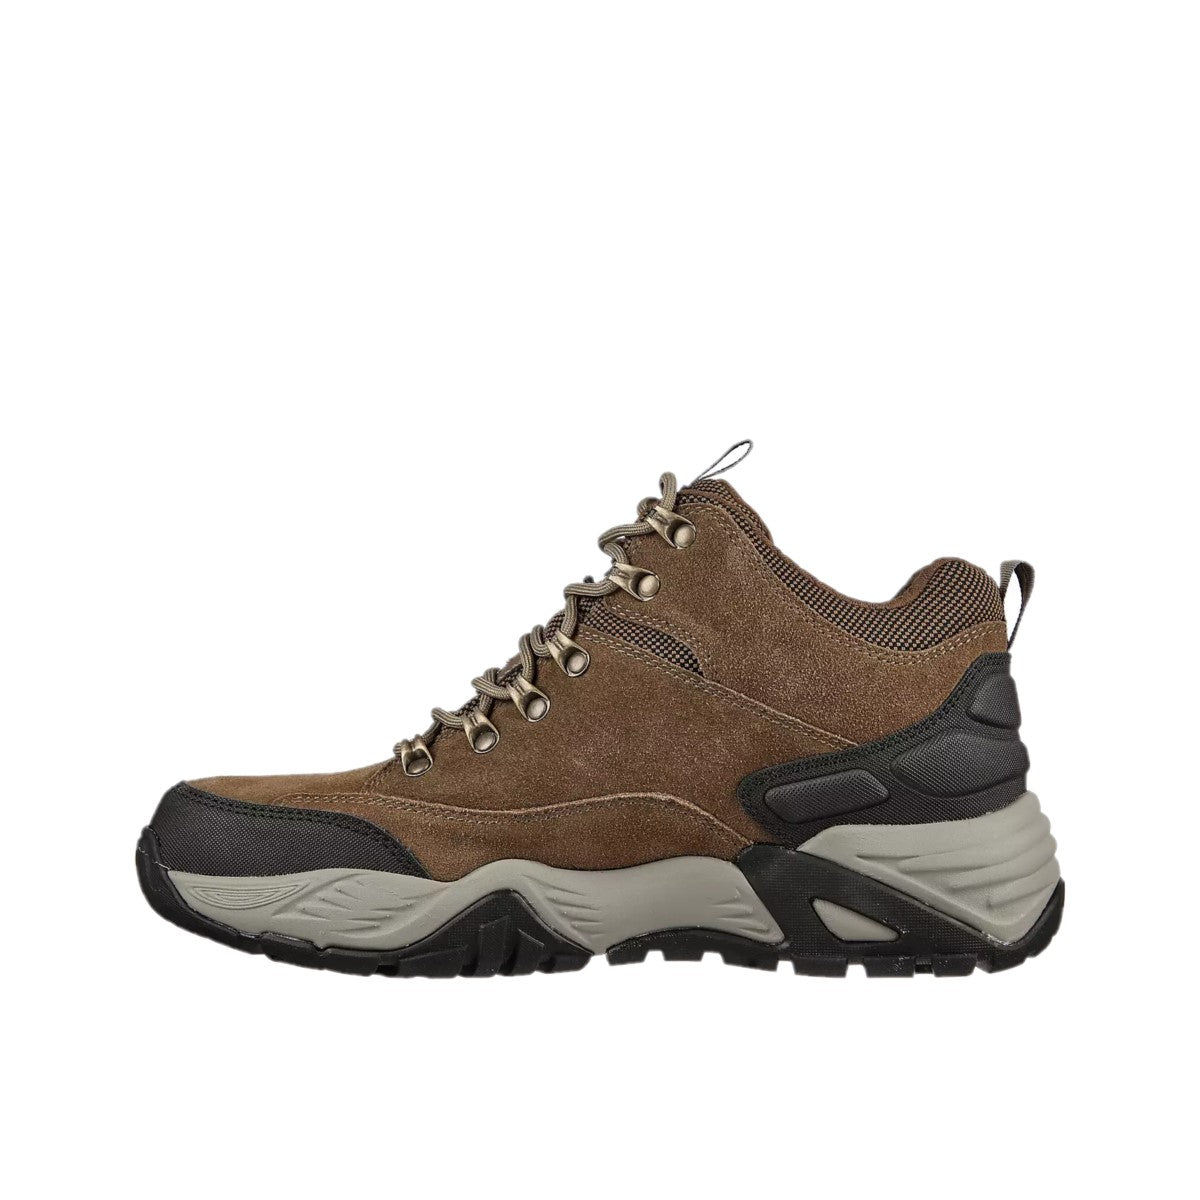 SKECHERS 204408WW/KHK ARCH FIT RECON - ROMAR MN'S (Extra Wide) Khaki Leather & Mesh Hiking Boots - Groove Rabbit